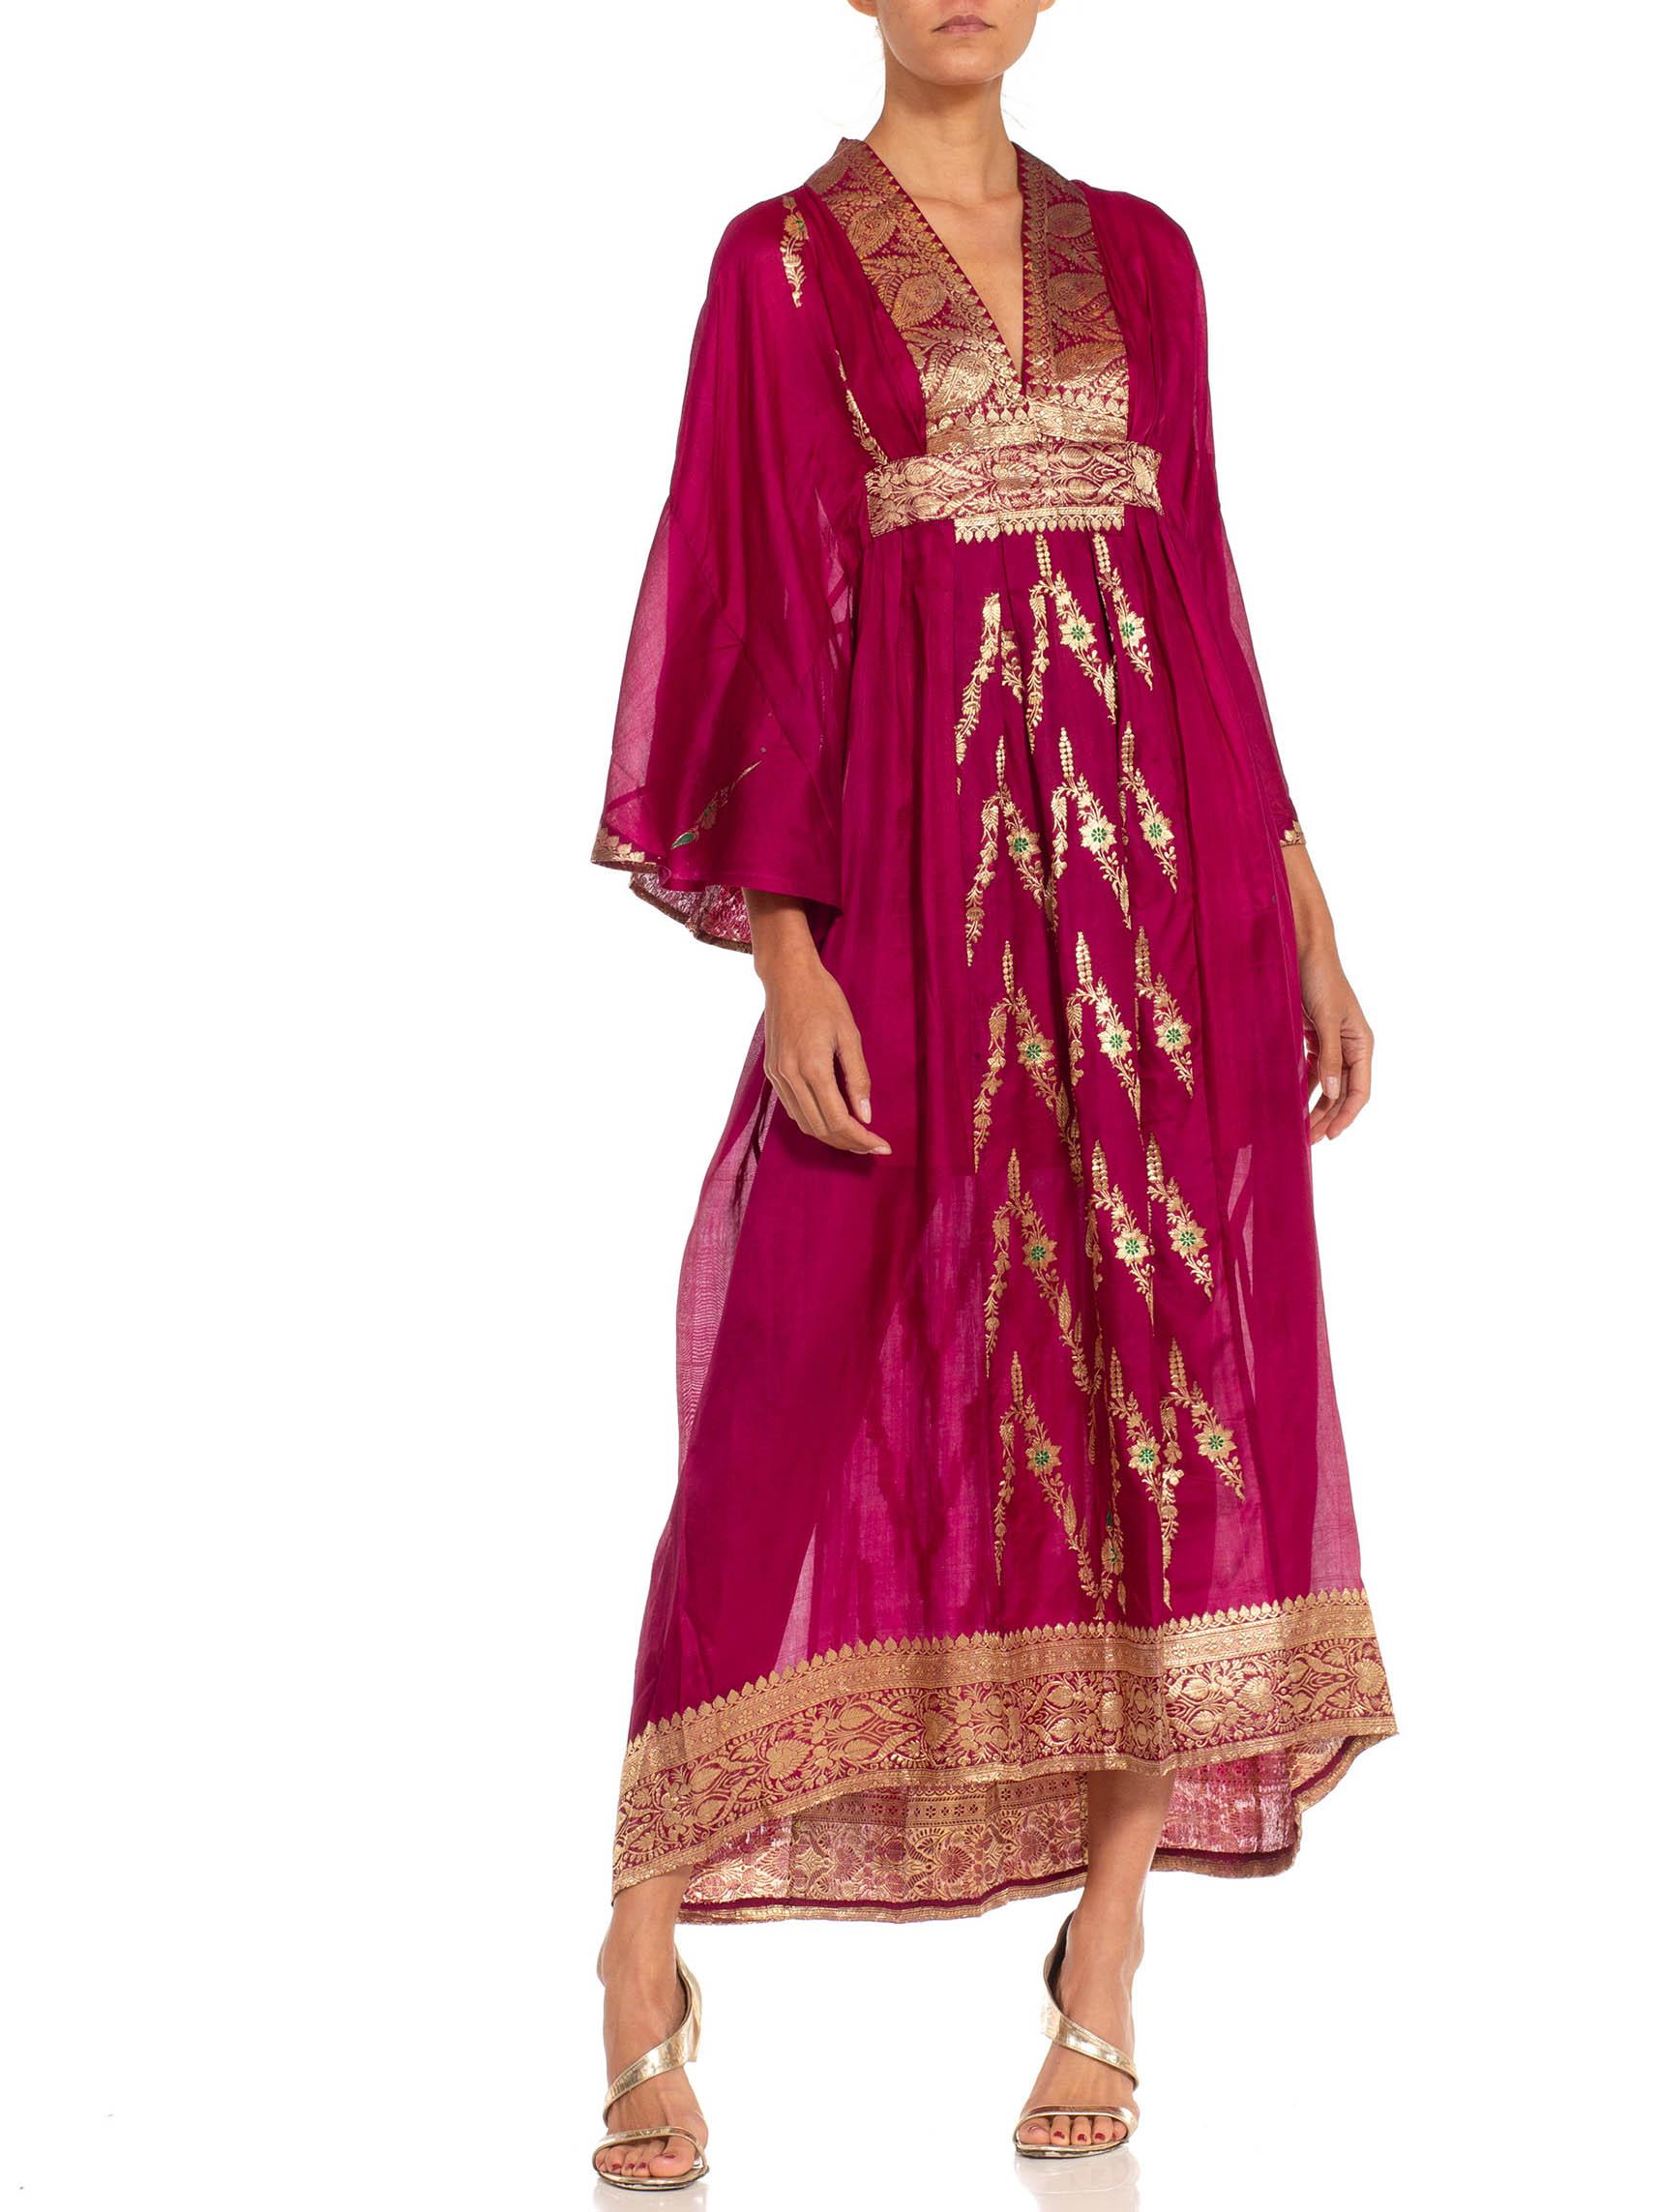 Morphew Collection Fuchsia & Gold Silk Kaftan Made From Vintage Saris For Sale 1